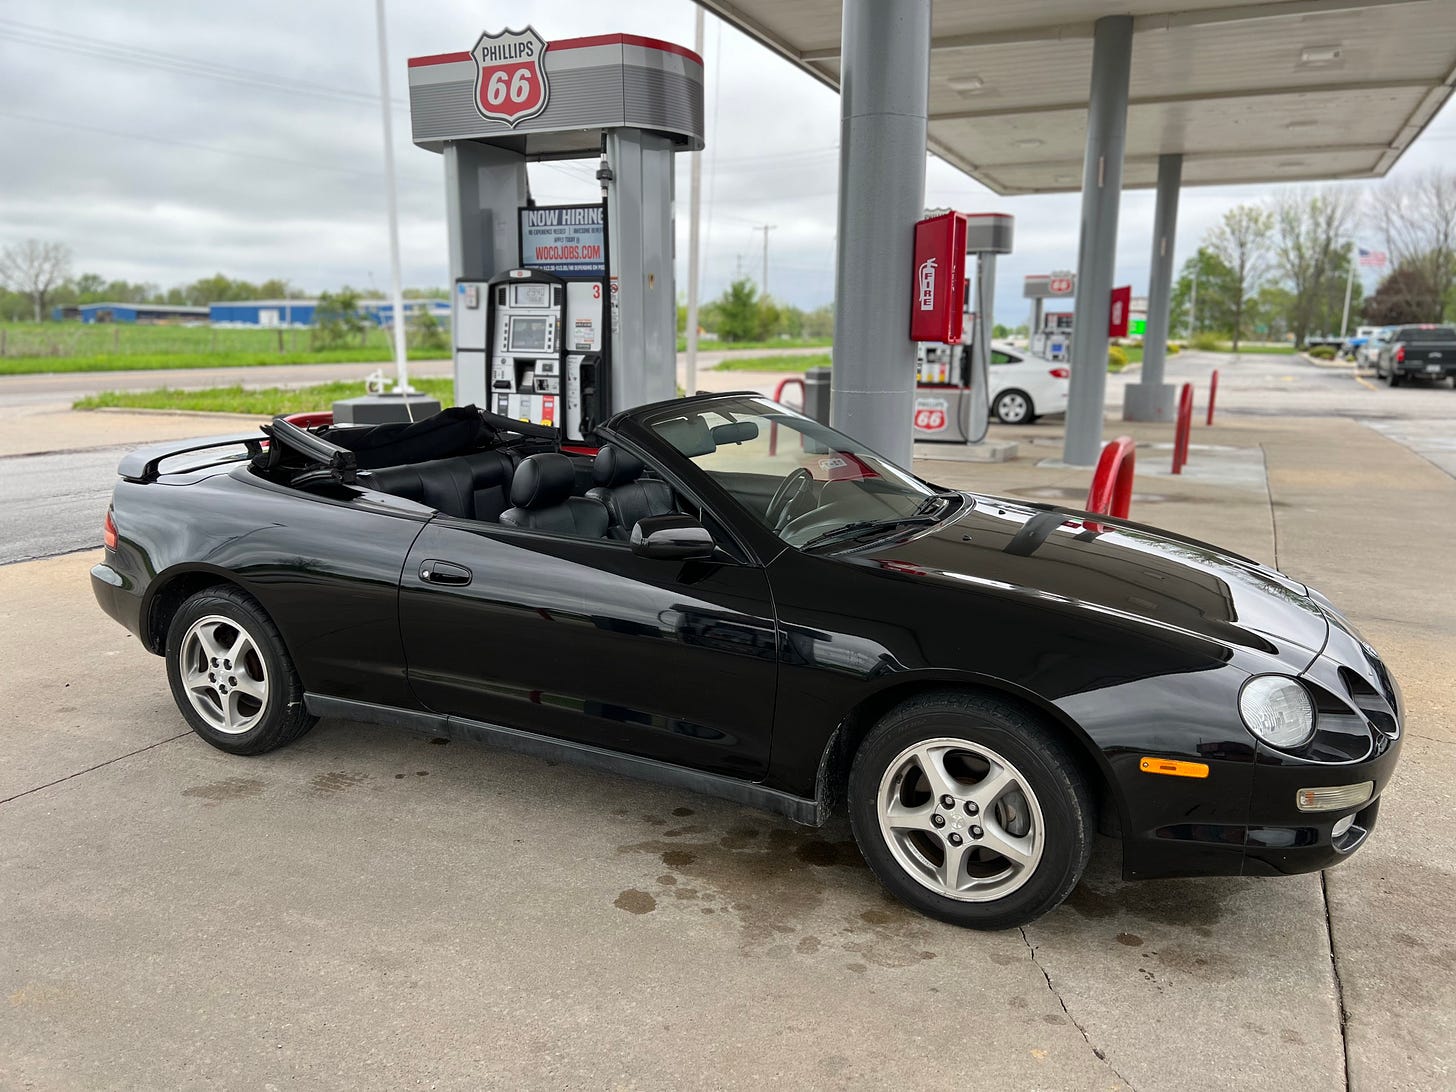 A black convertible at a gas pump. It's a pretty fucking cool looking car.